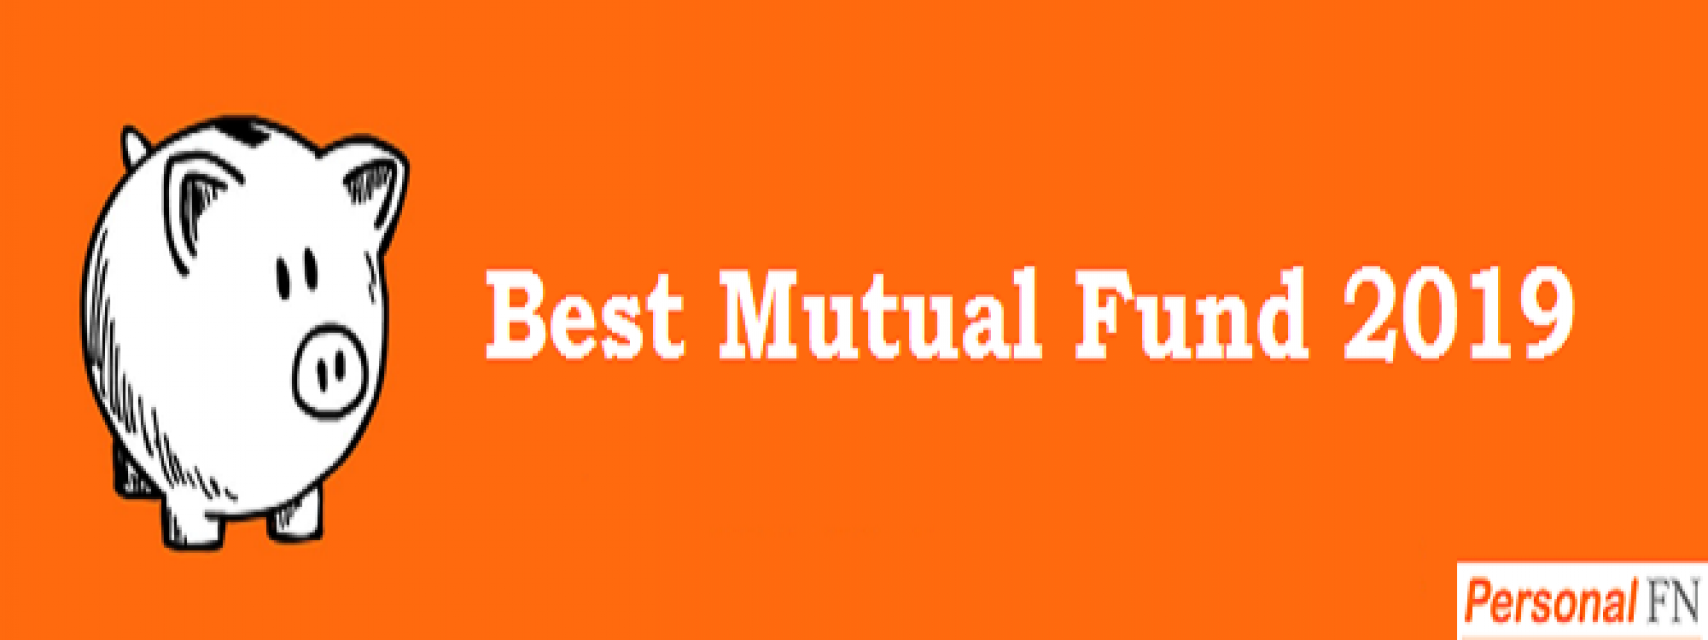 Personalfn - Best Financial Planner And Mutual Fund Research Service Provider